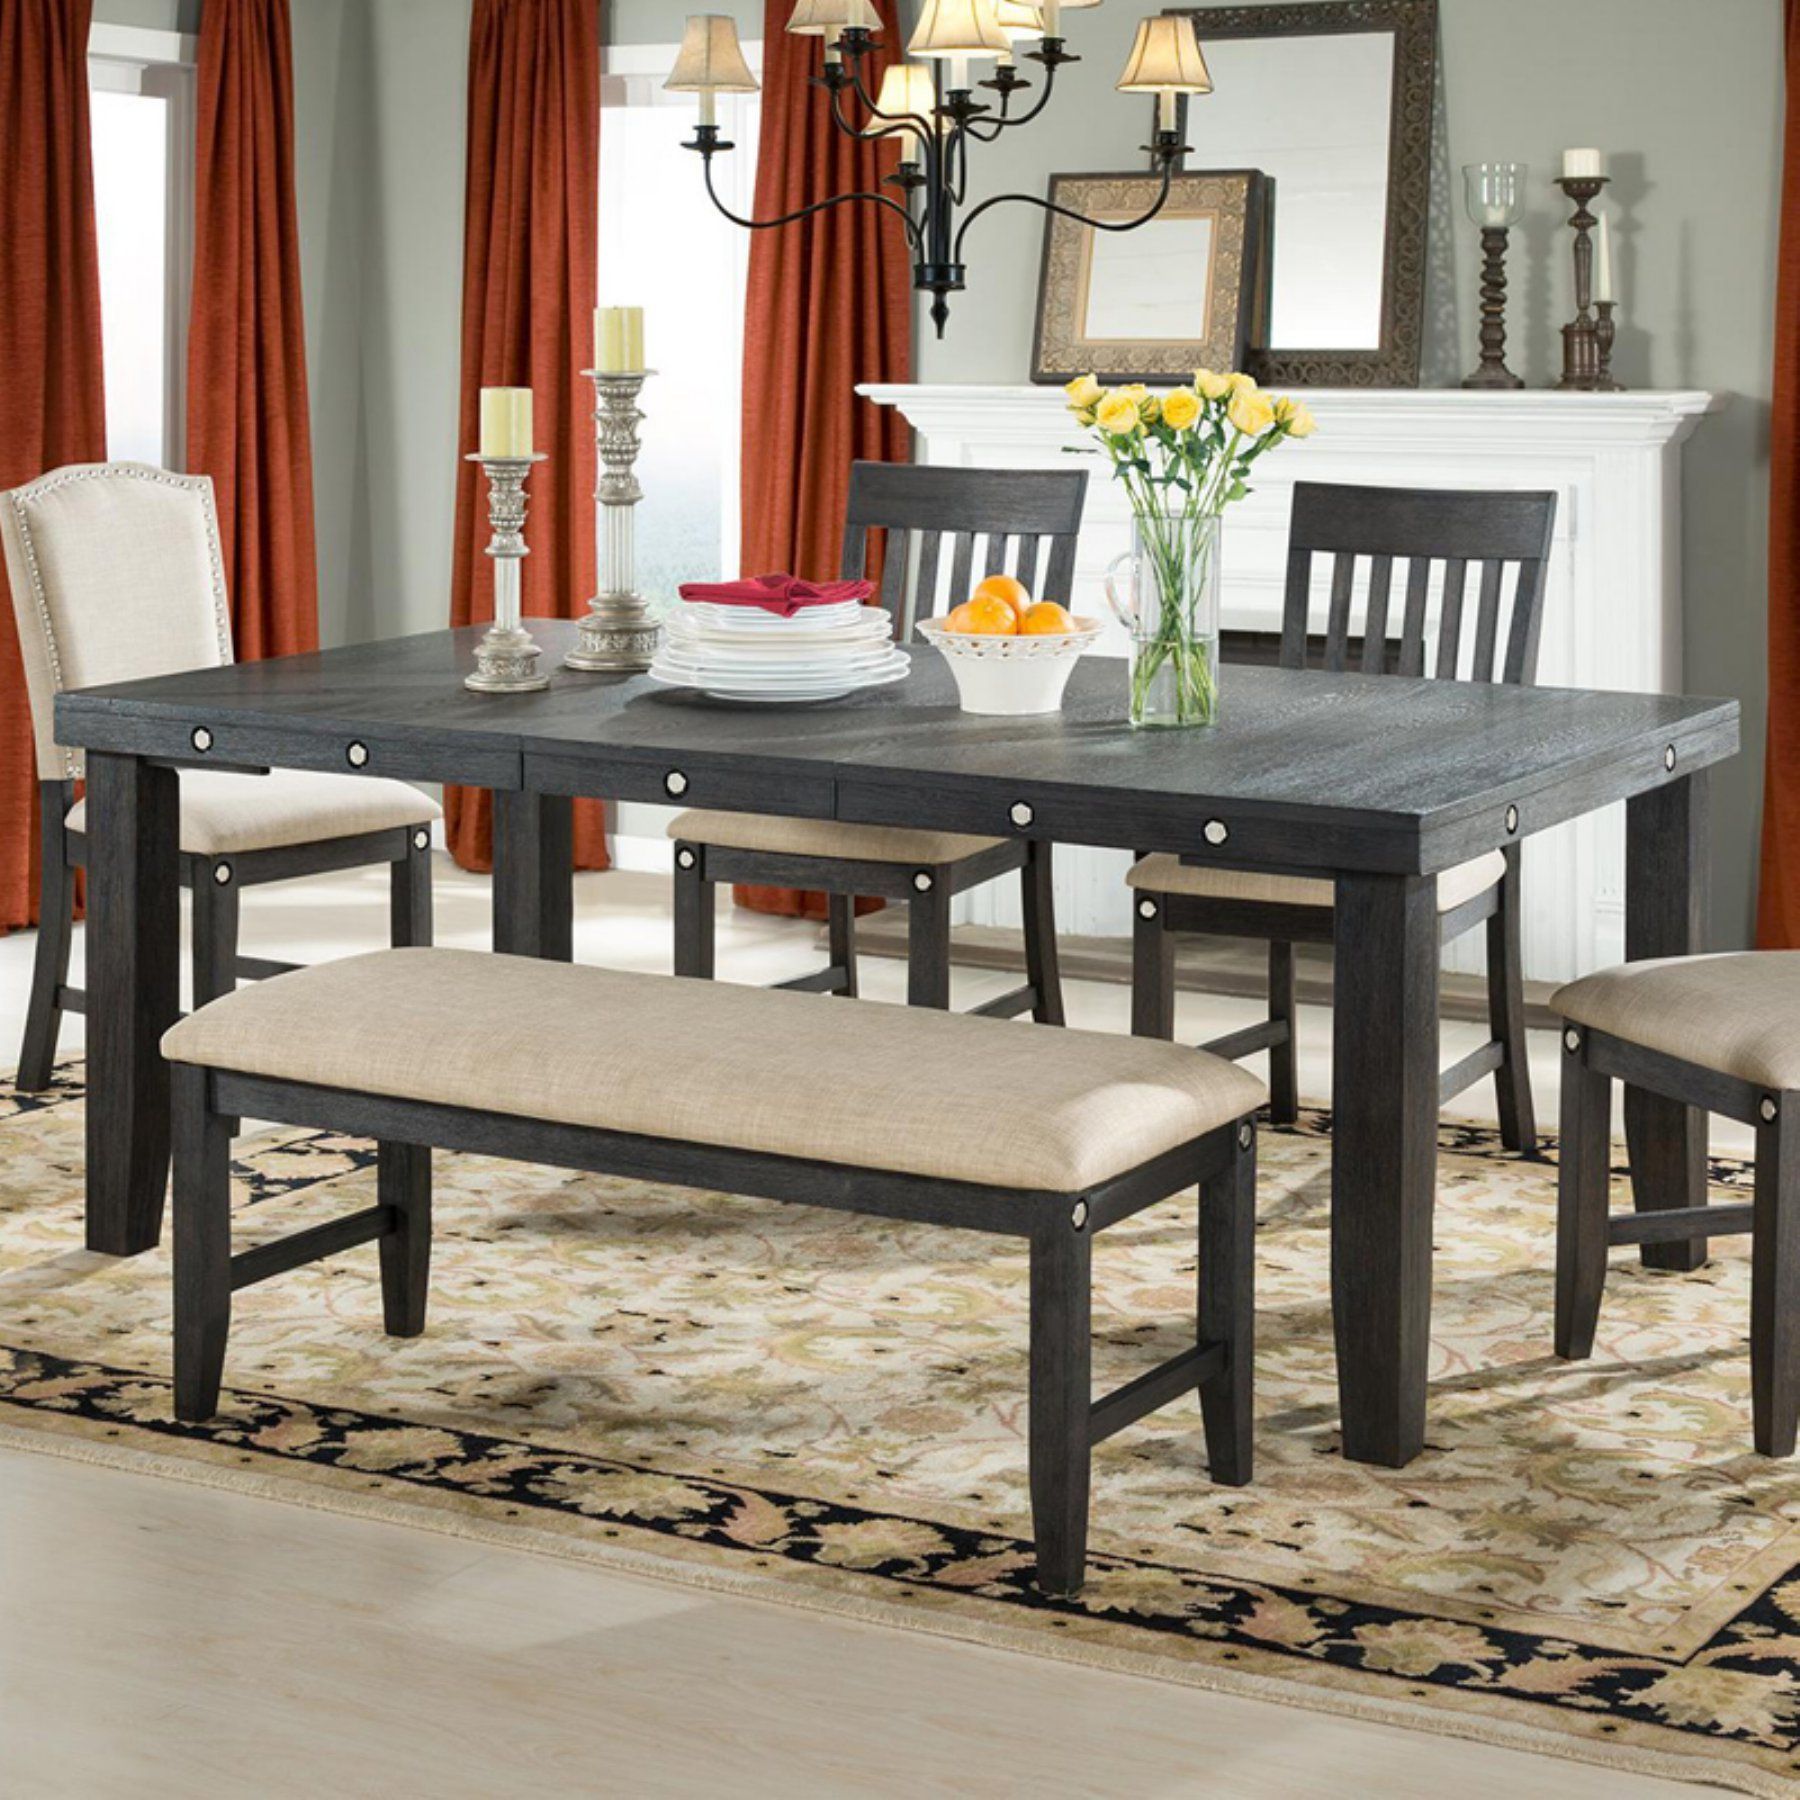 Vilo Home Marseille Provence Dining Table – Vh1100 | Products With Regard To Most Current Pattonsburg 5 Piece Dining Sets (Photo 12 of 20)